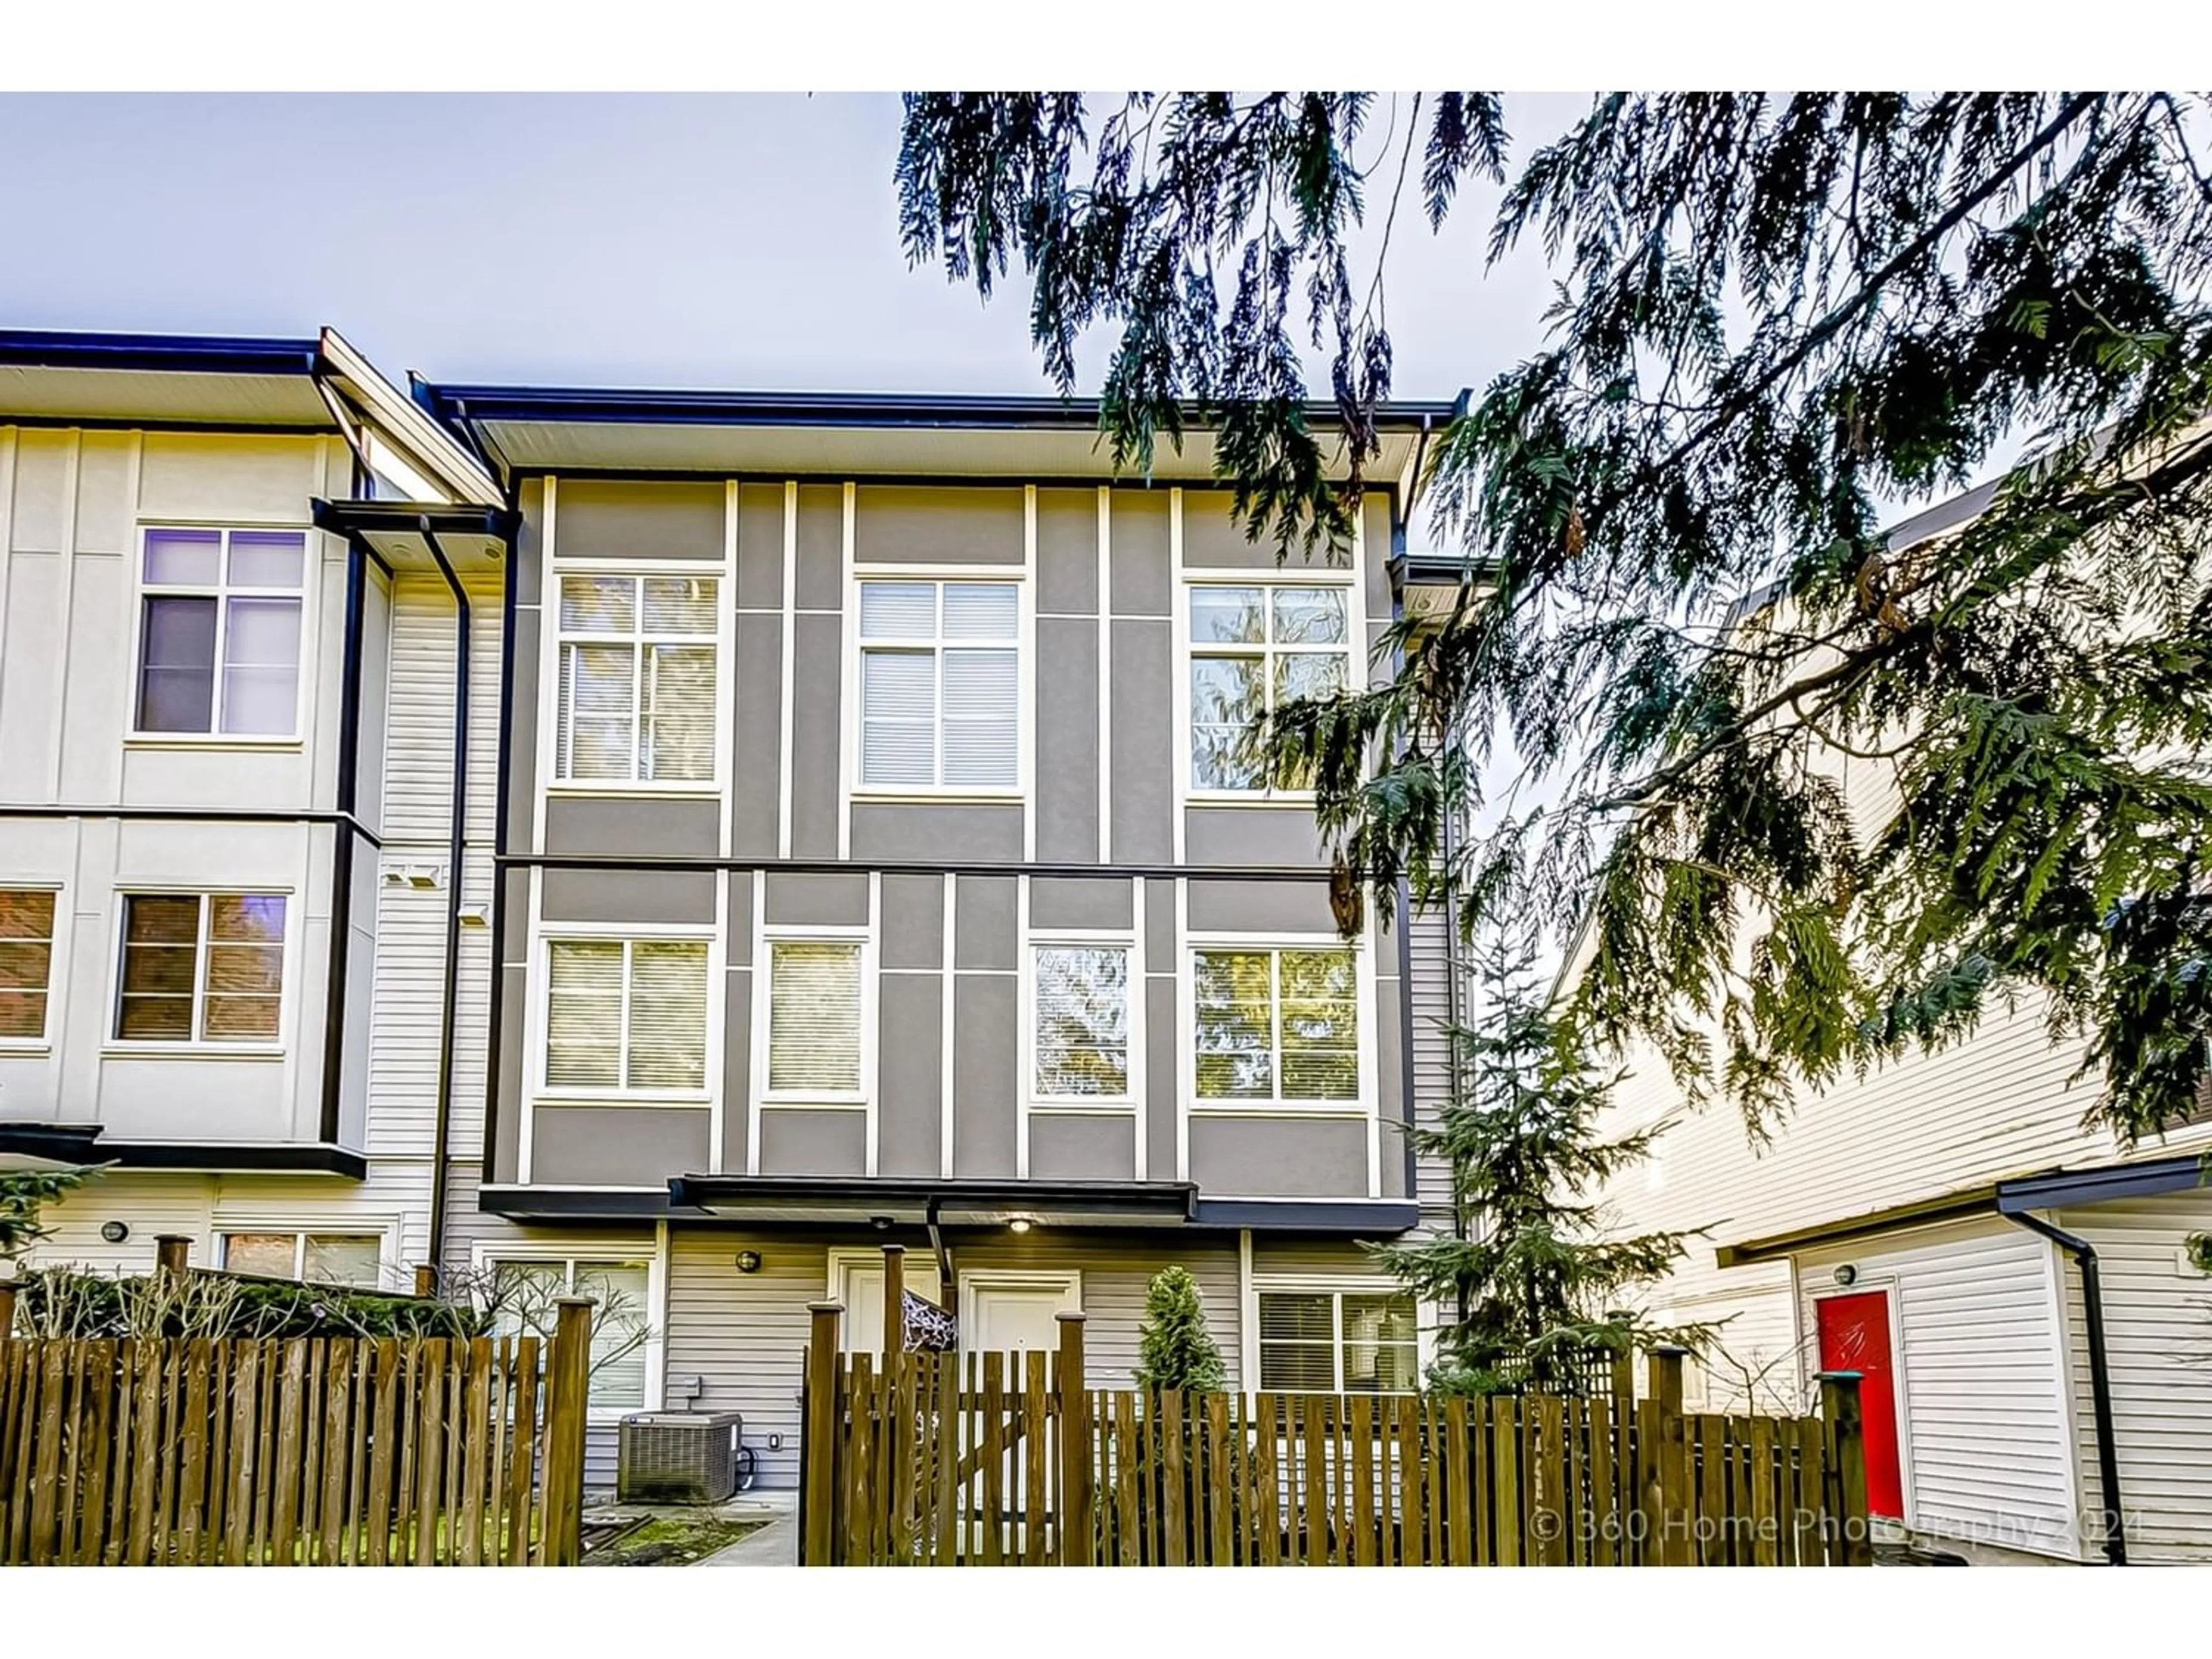 A pic from exterior of the house or condo for 58 5867 129 STREET, Surrey British Columbia V3X0J4